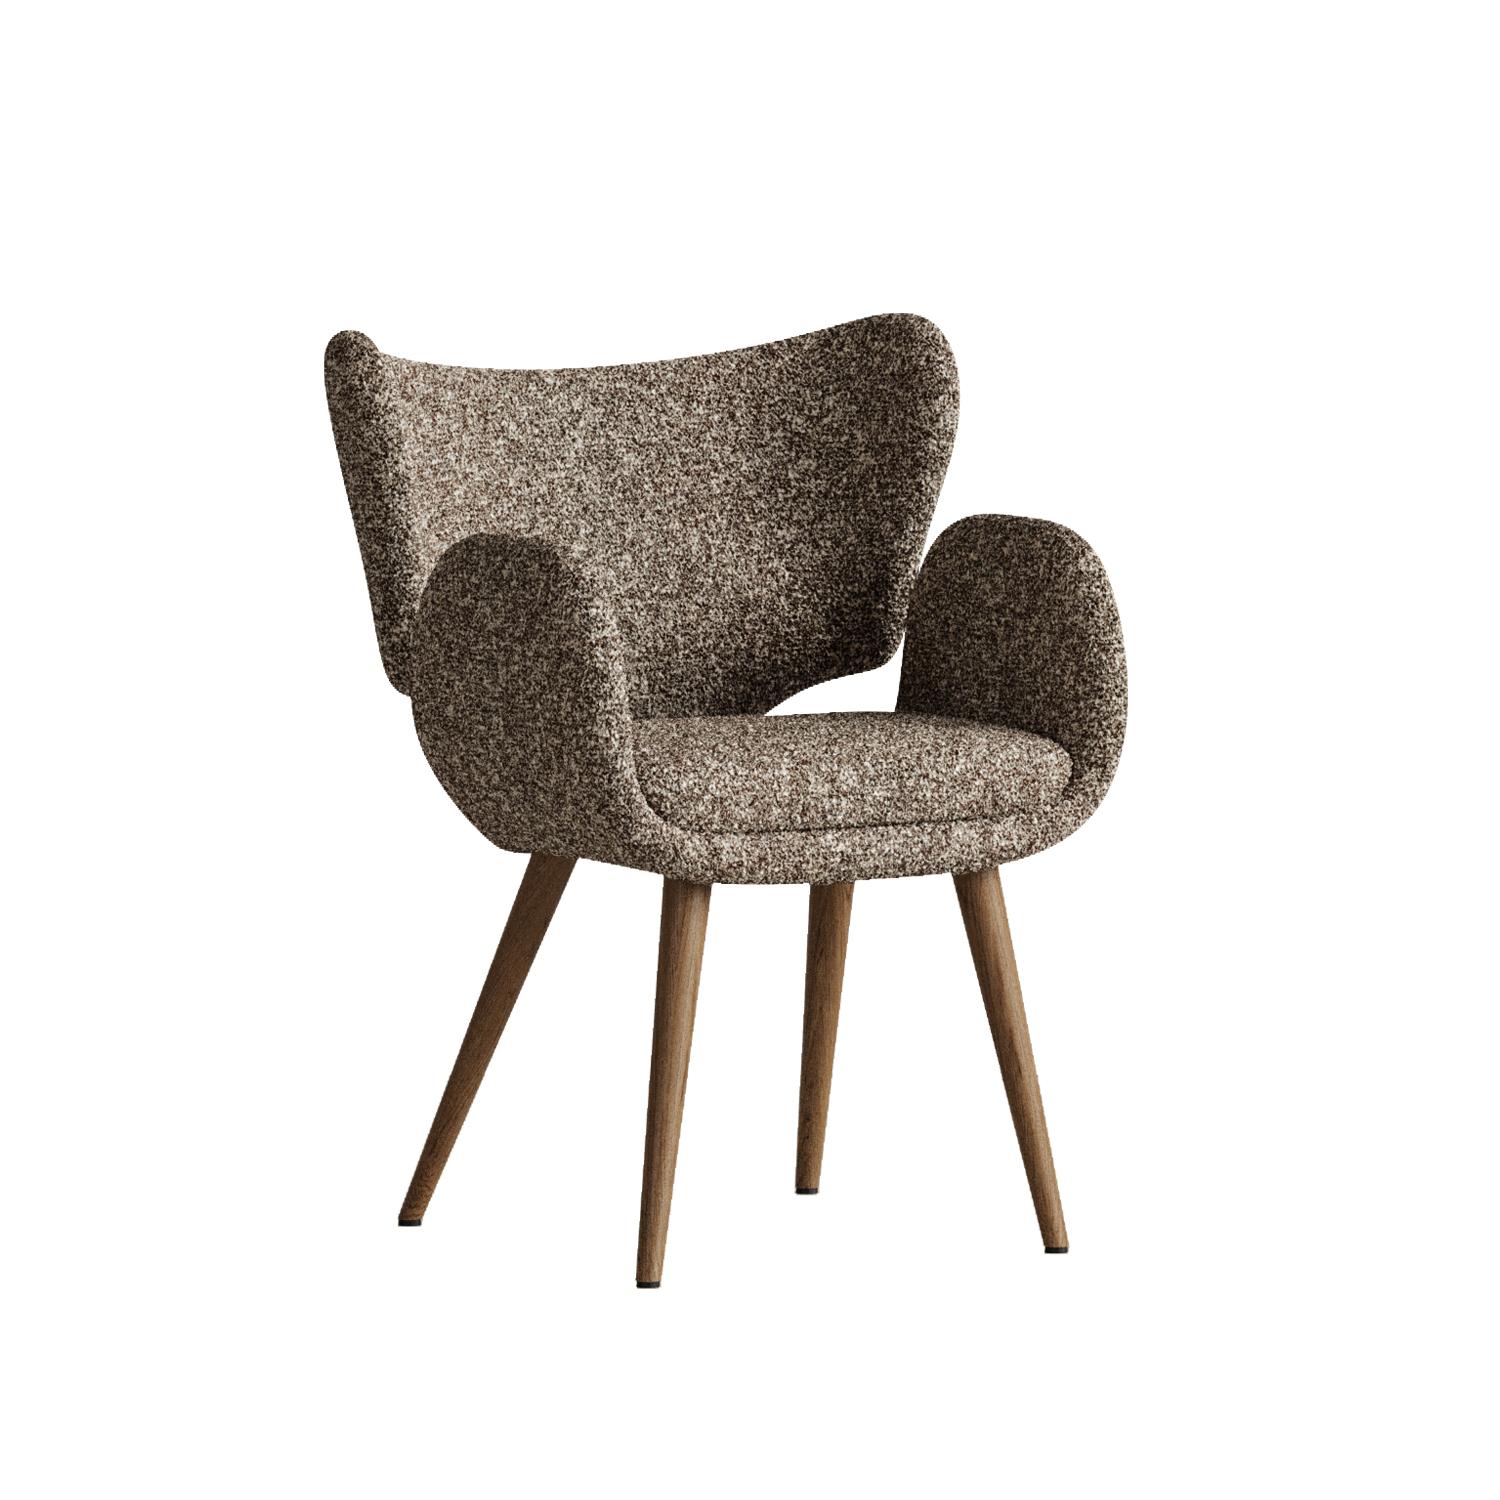 Beige Madina Chair by Plyus Design
Dimensions: D 64 x W 68 x H 90 cm
Materials:  Wood, HR foam, polyester wadding, fabric upholstery.

“Madina” chair.
The diamond of your dining room.



PLYUS Furniture creates pieces in collectible design segment.